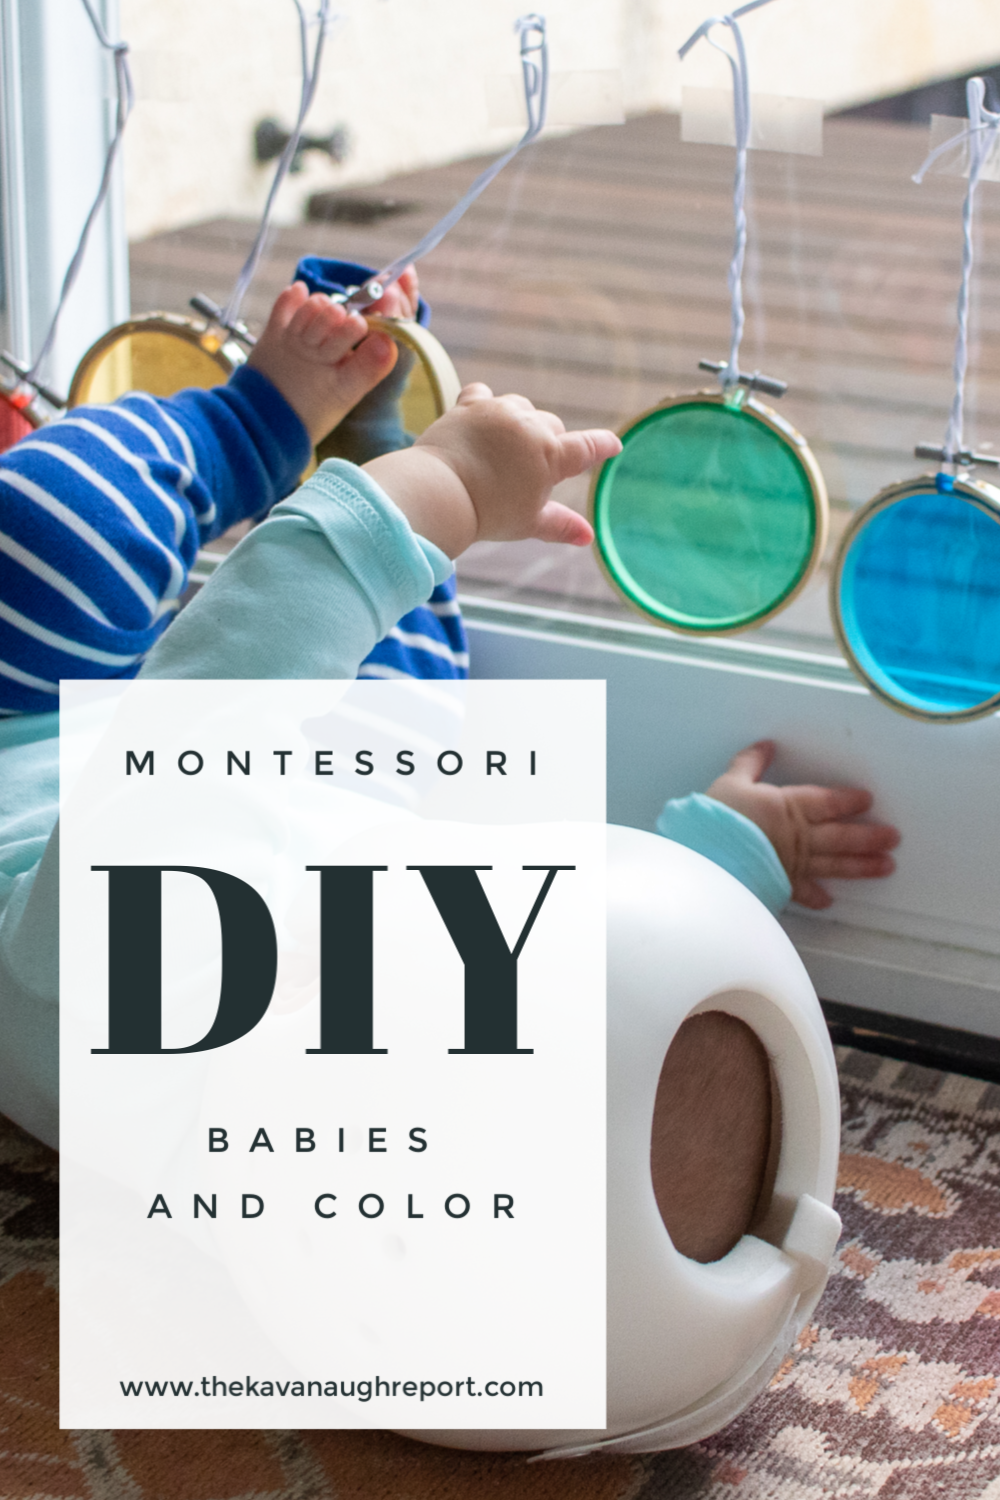 Baby development happens best through sensory rich play and exploration. Here's an easy, baby activity to help your baby explore color.